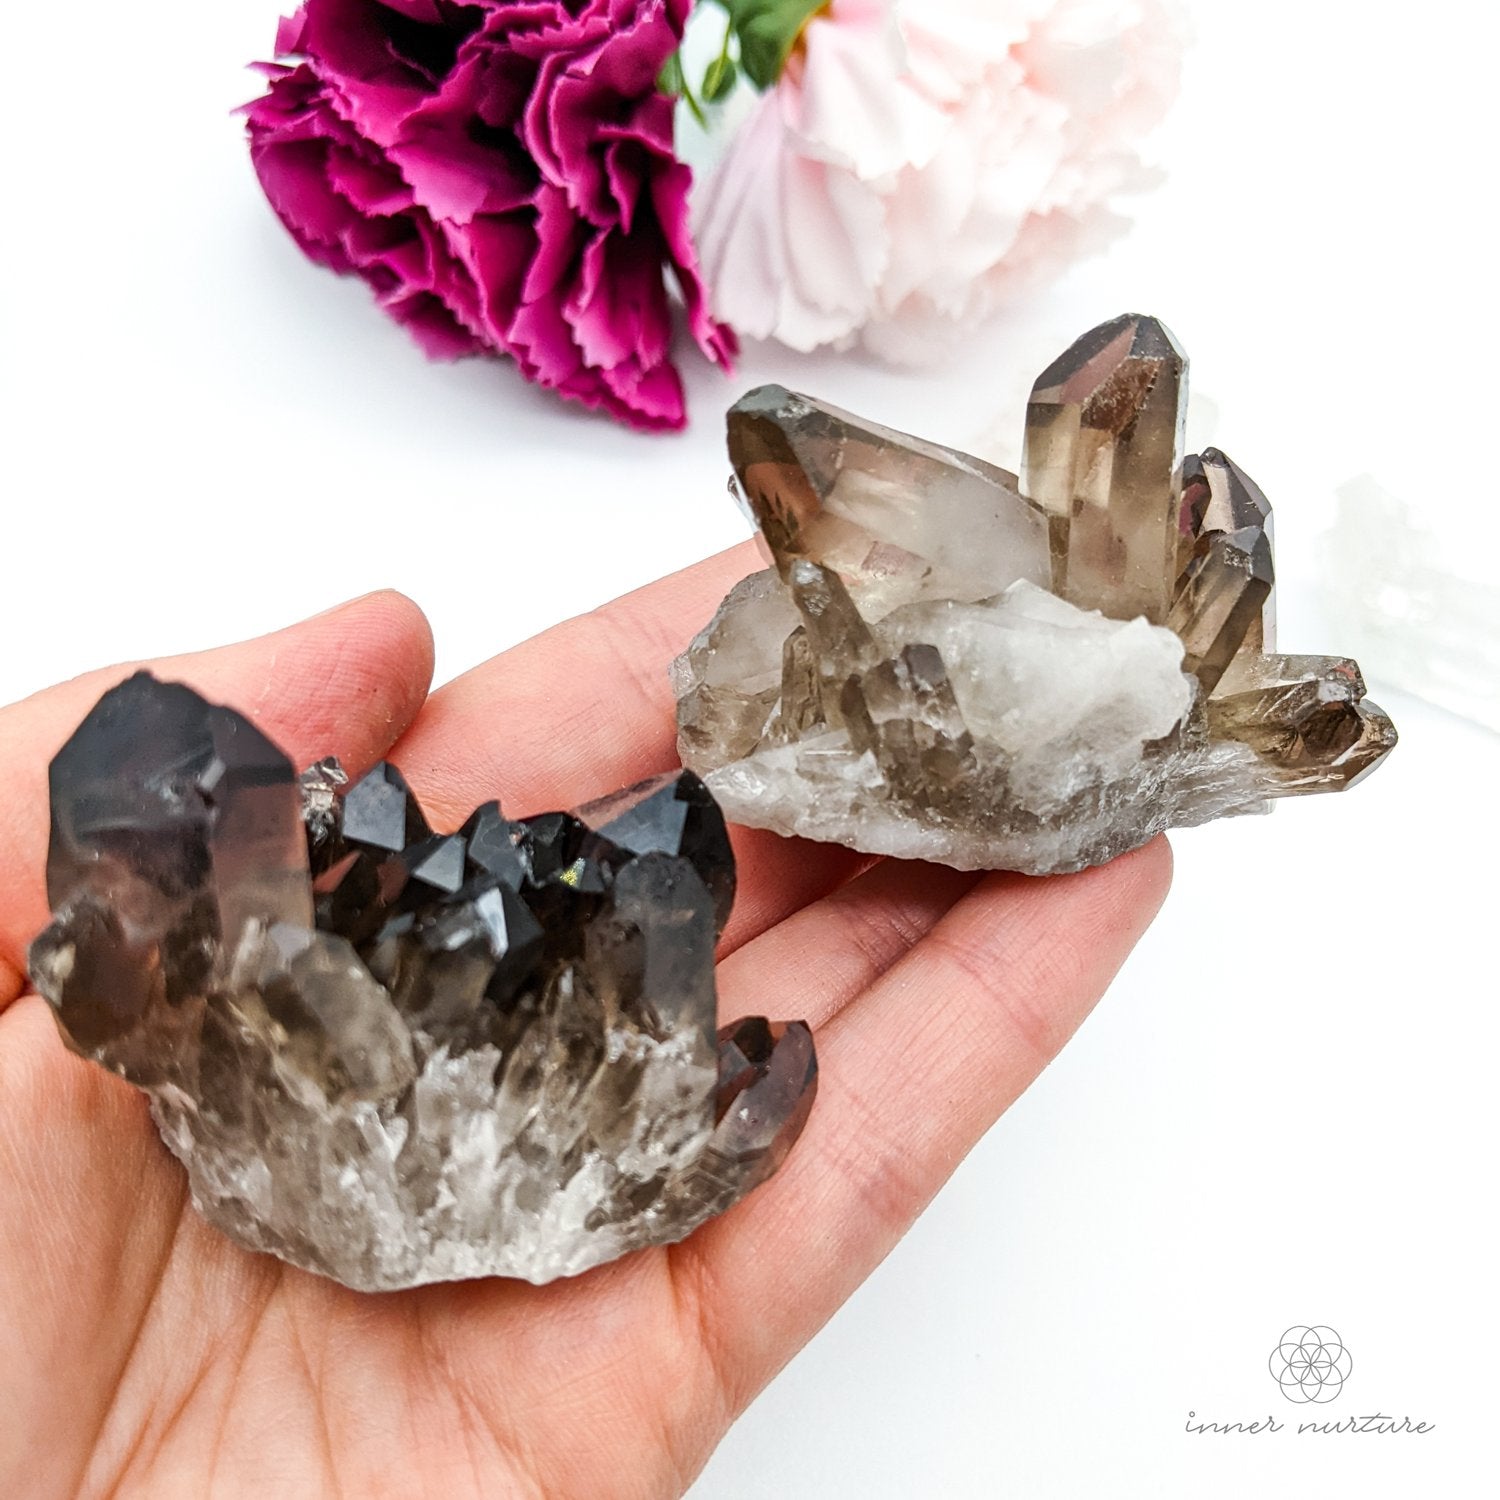 Smoky Quartz Cluster - Small Sizes | Beautiful Healing Crystals Australia | Shop Online - Inner Nurture - Ethically Sourced